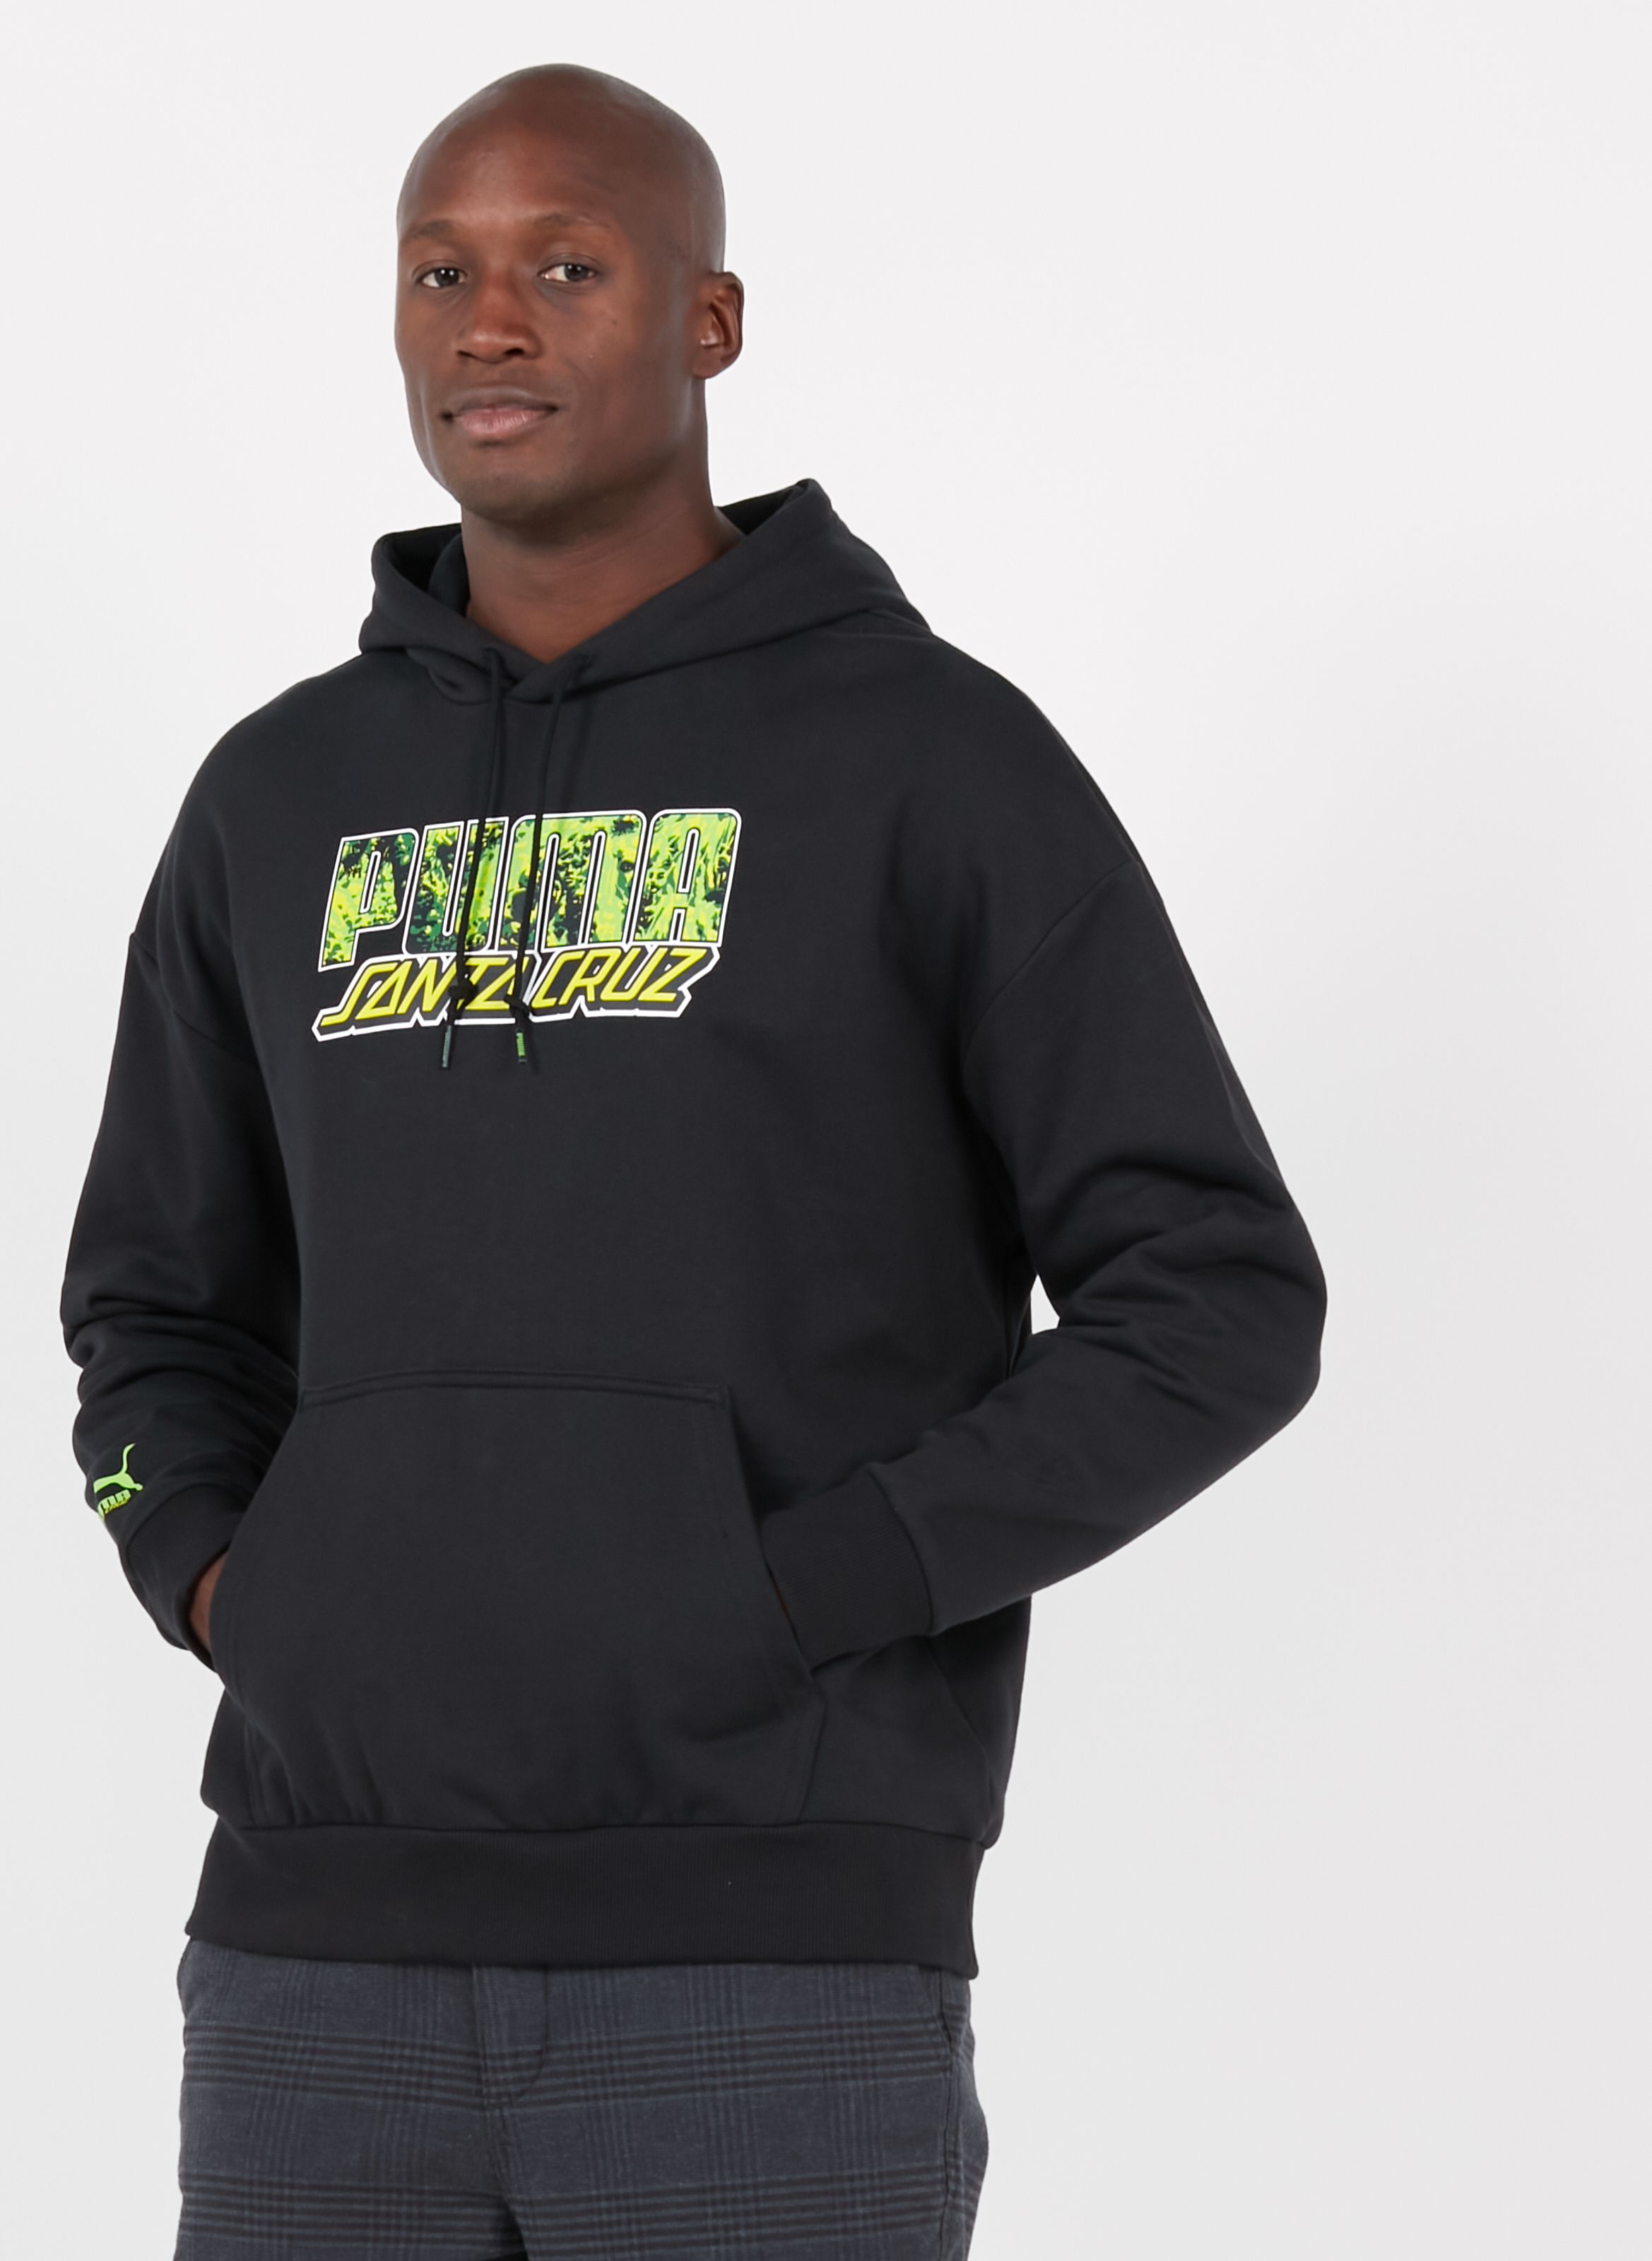 puma pullovers online shopping